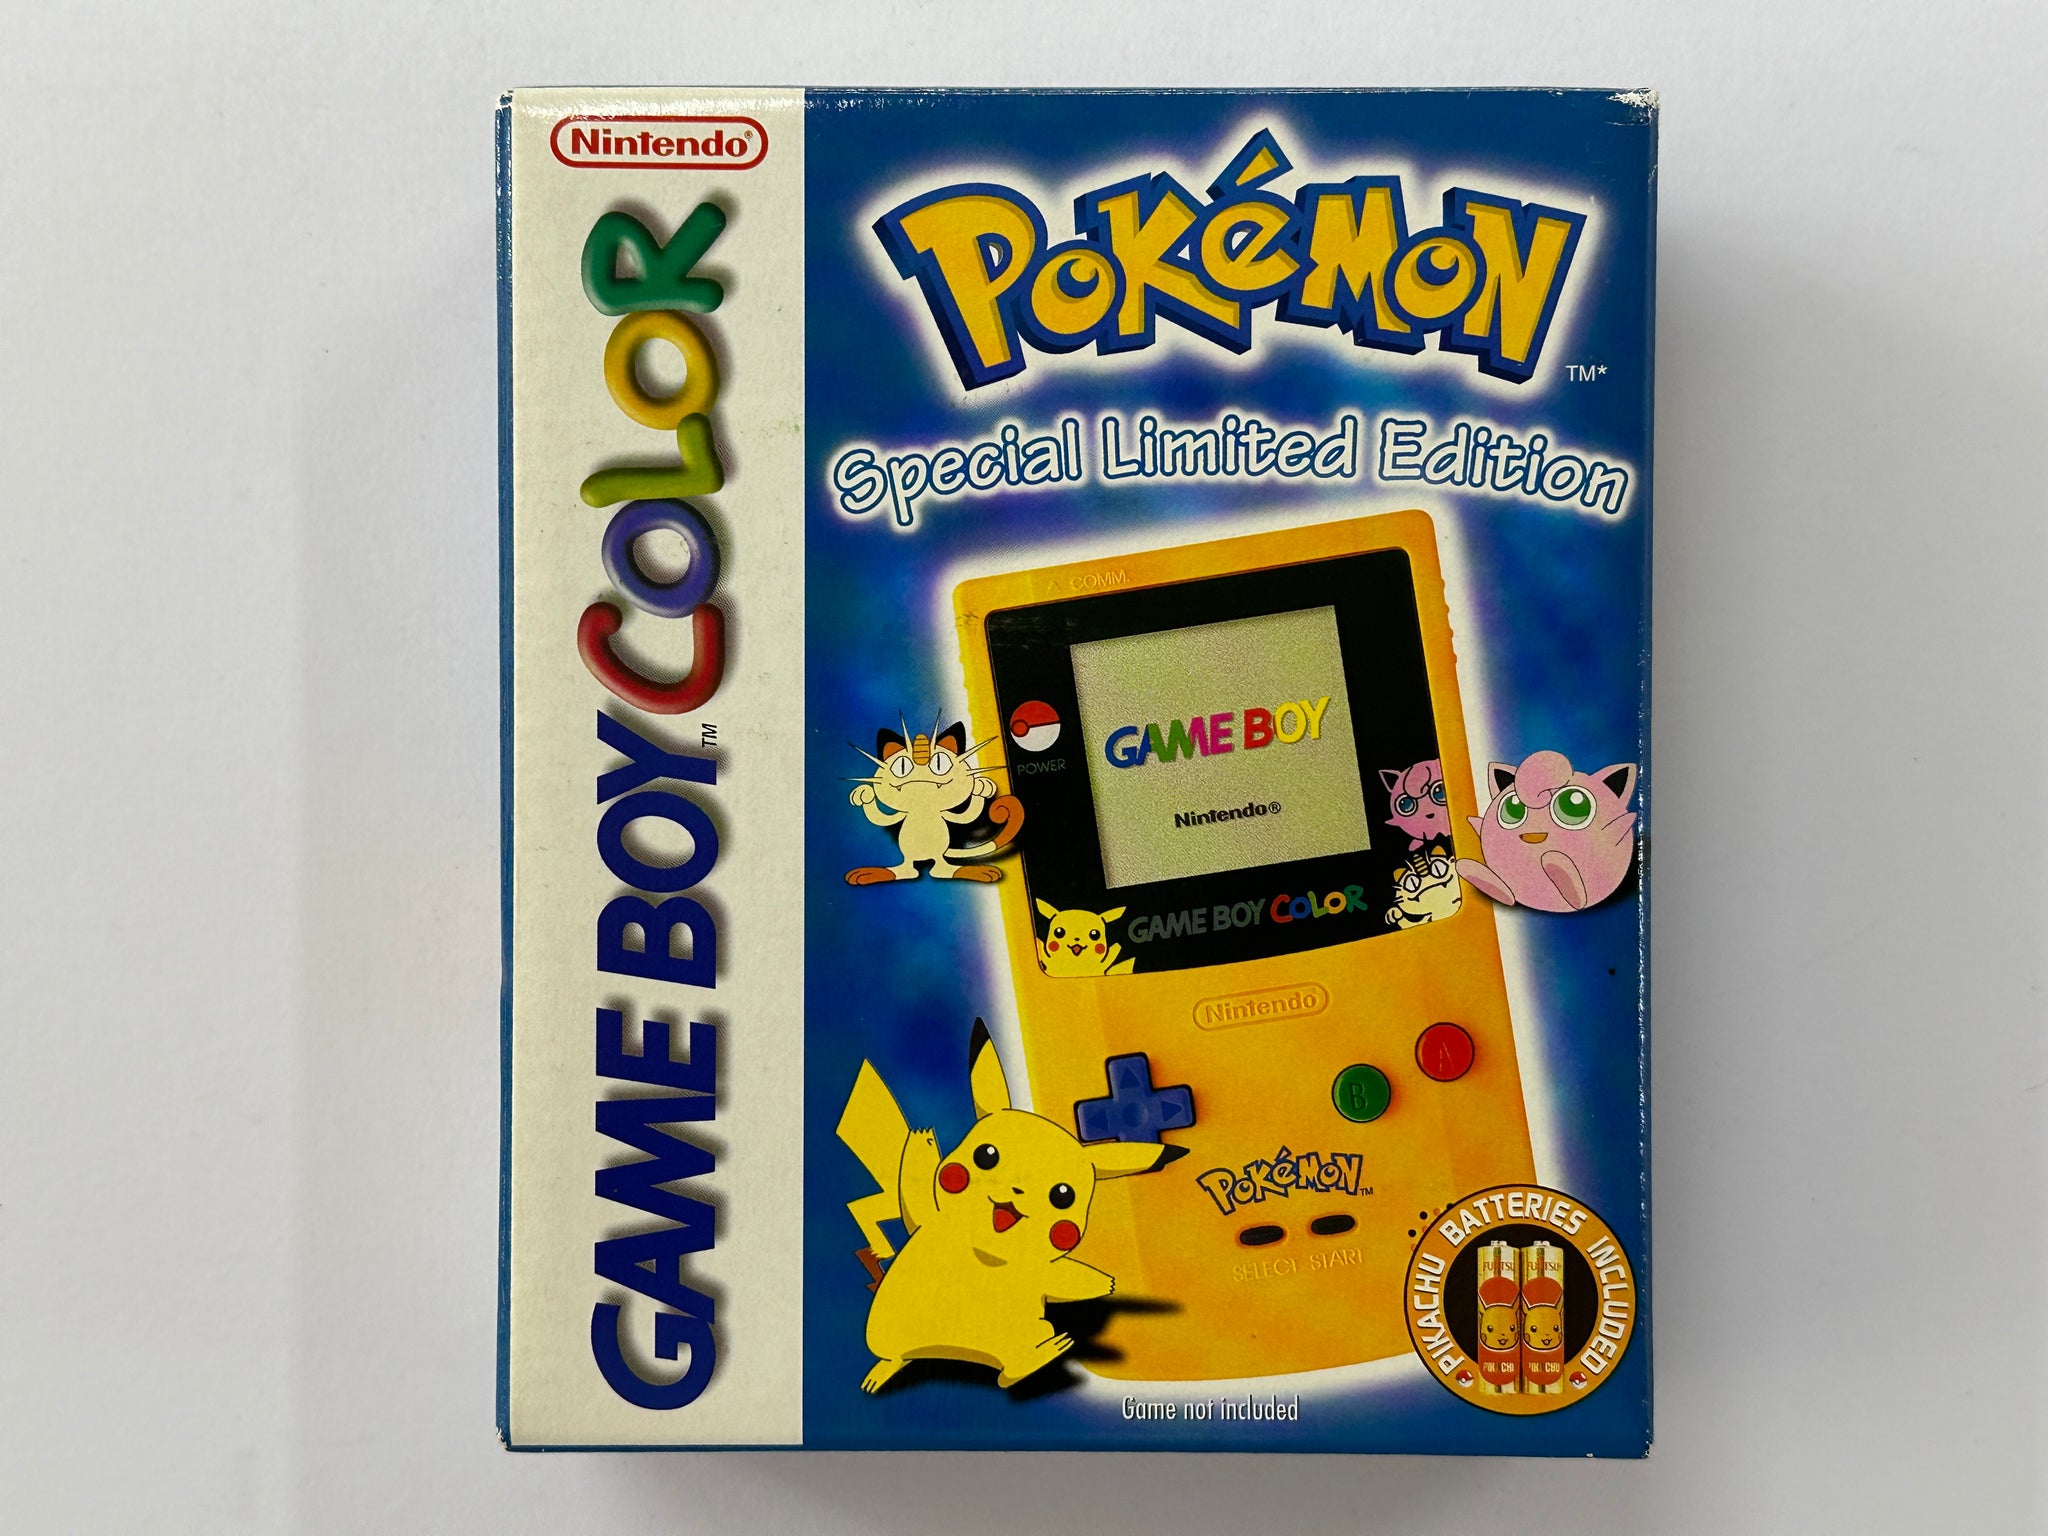 Limited Special Edition Pokemon Pikachu Nintendo Gameboy Color Console Complete In Box with Pikachu Batteries